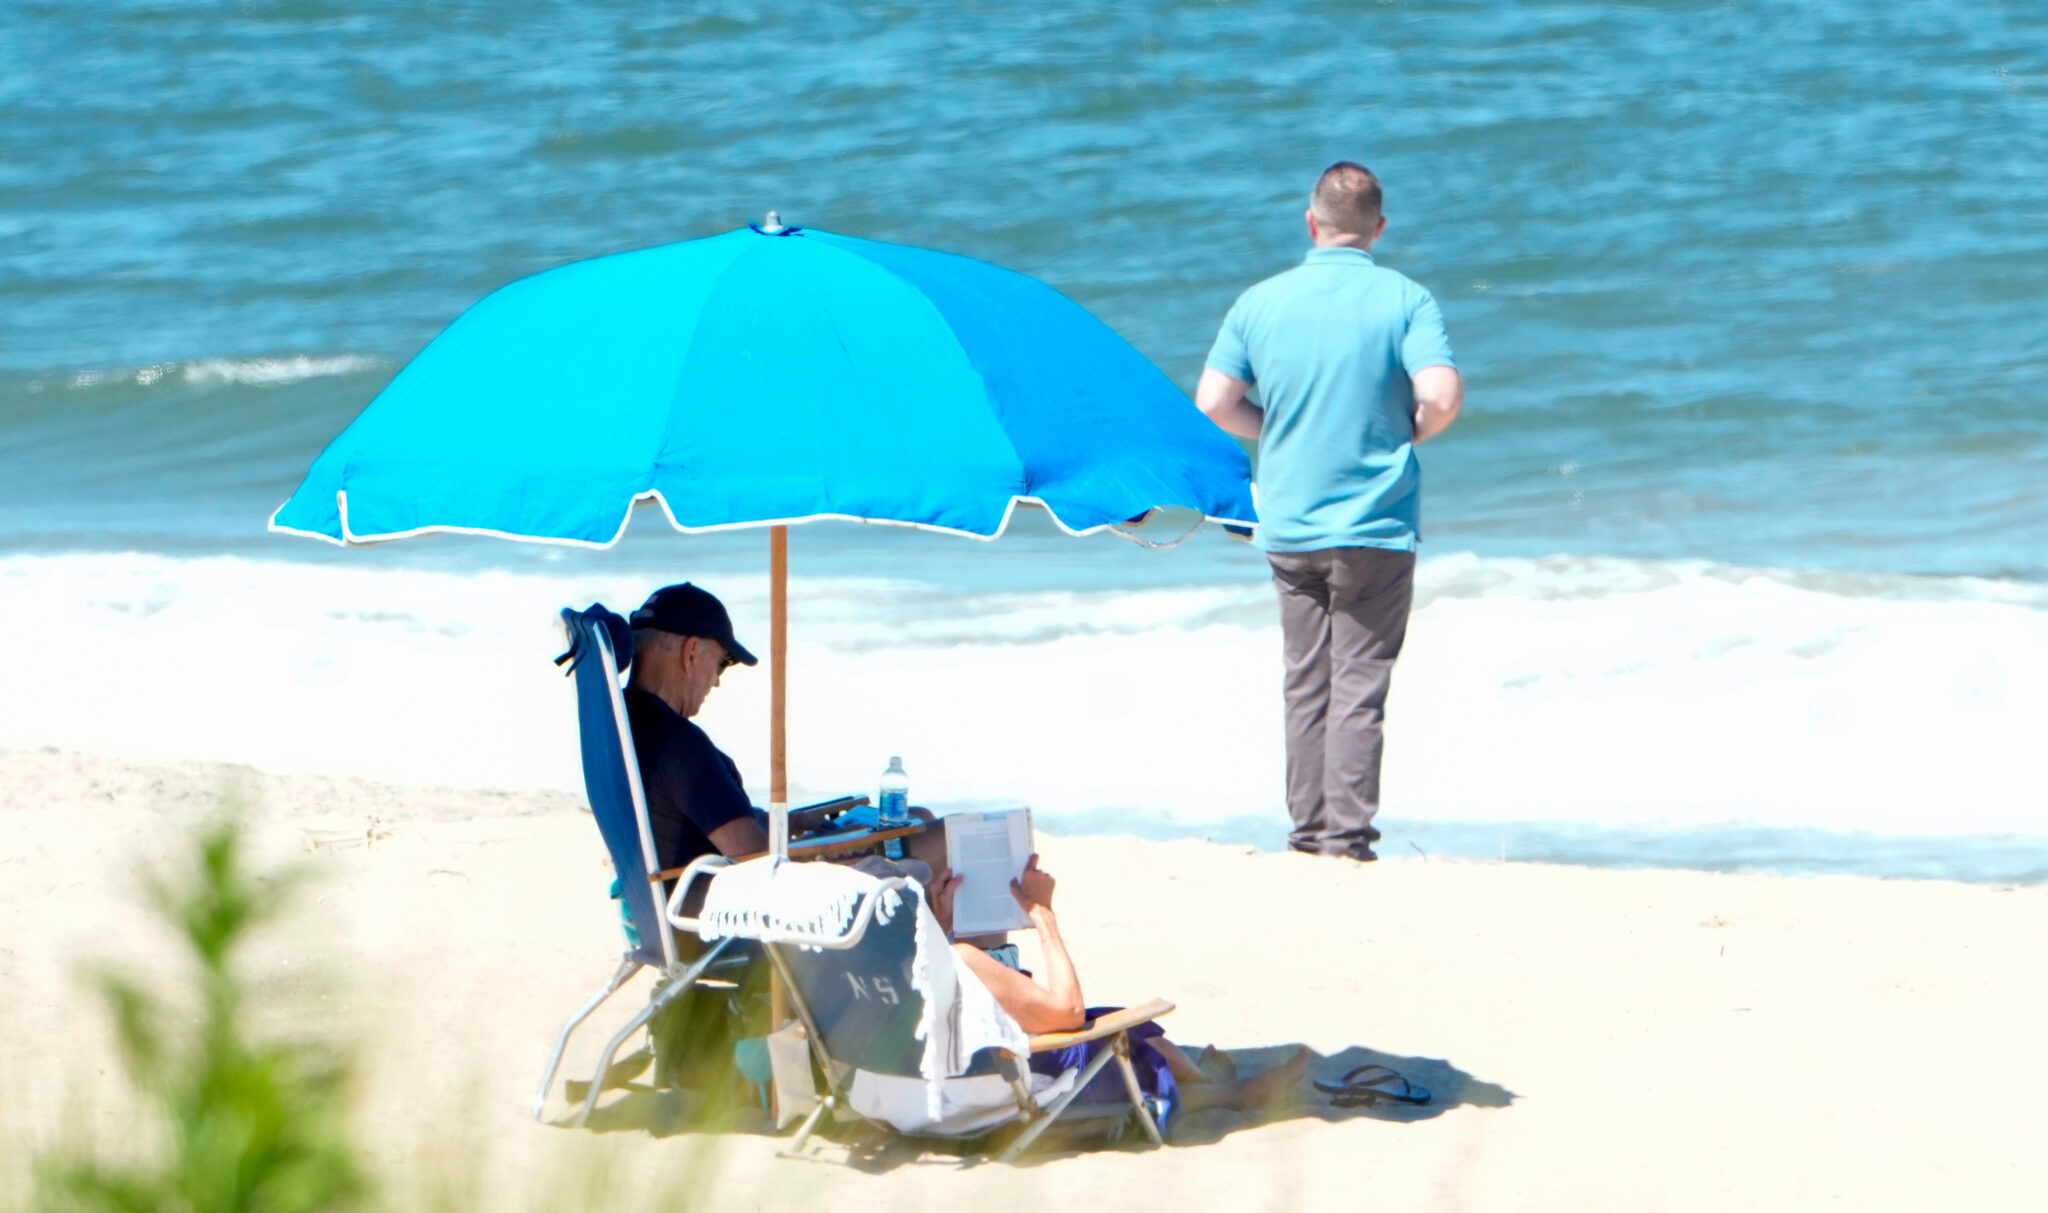 US President Joe Biden (left) and First Lady Jill Biden sit under an umbrella with a secret service agent nearby, in Rehoboth Beach, Delaware, on August 1, 2023. Photo: AFP.